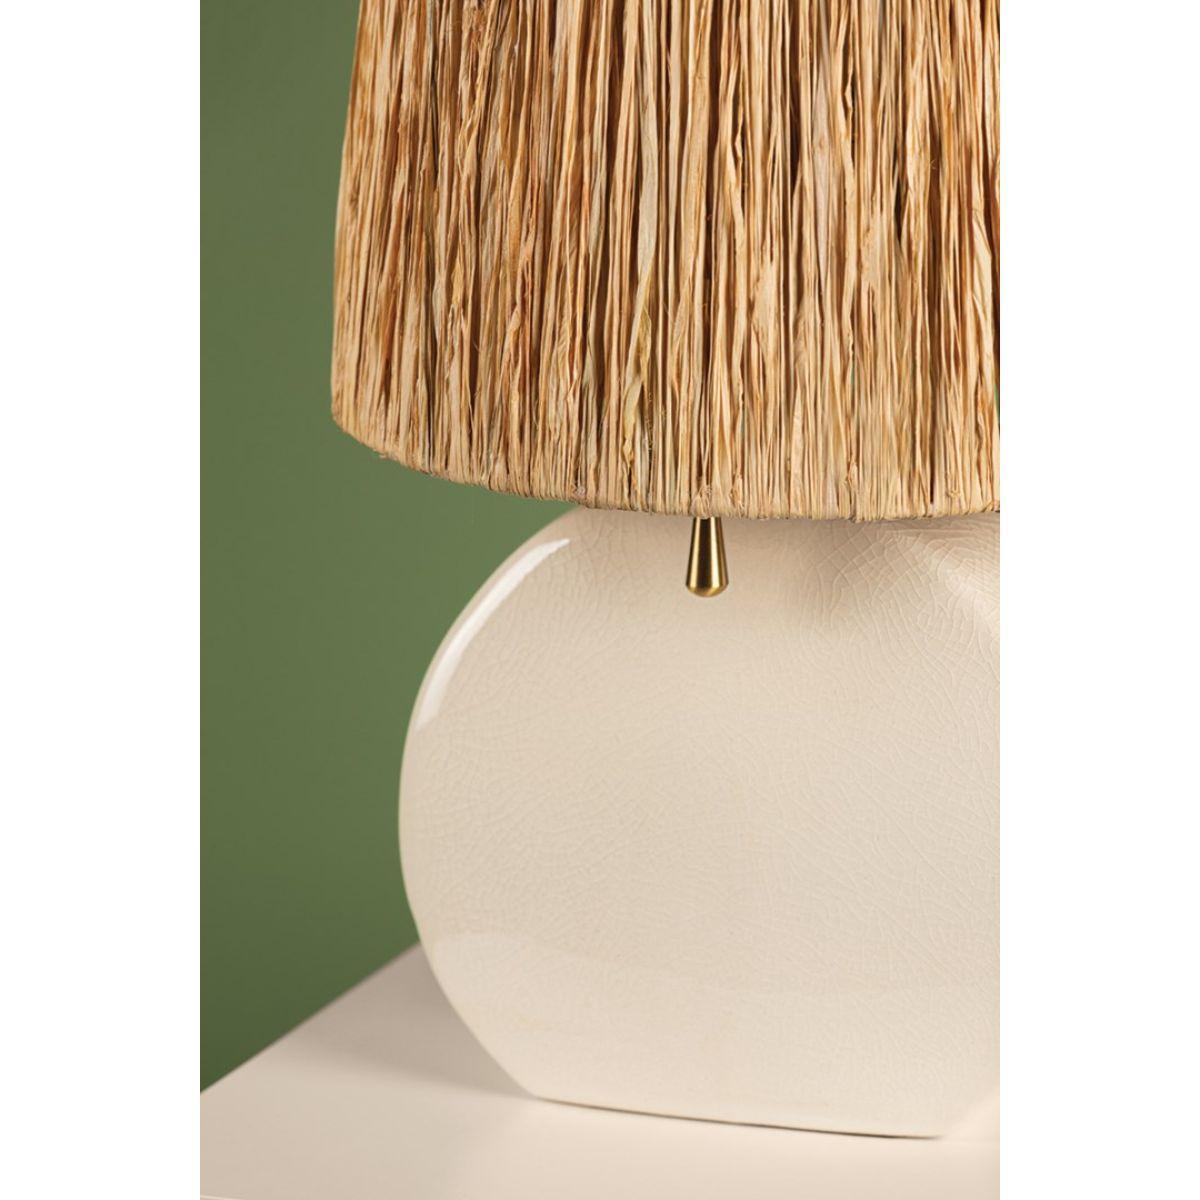 Aneesa Table Lamp Ceramic Ivory Crackle with Aged Brass Accents